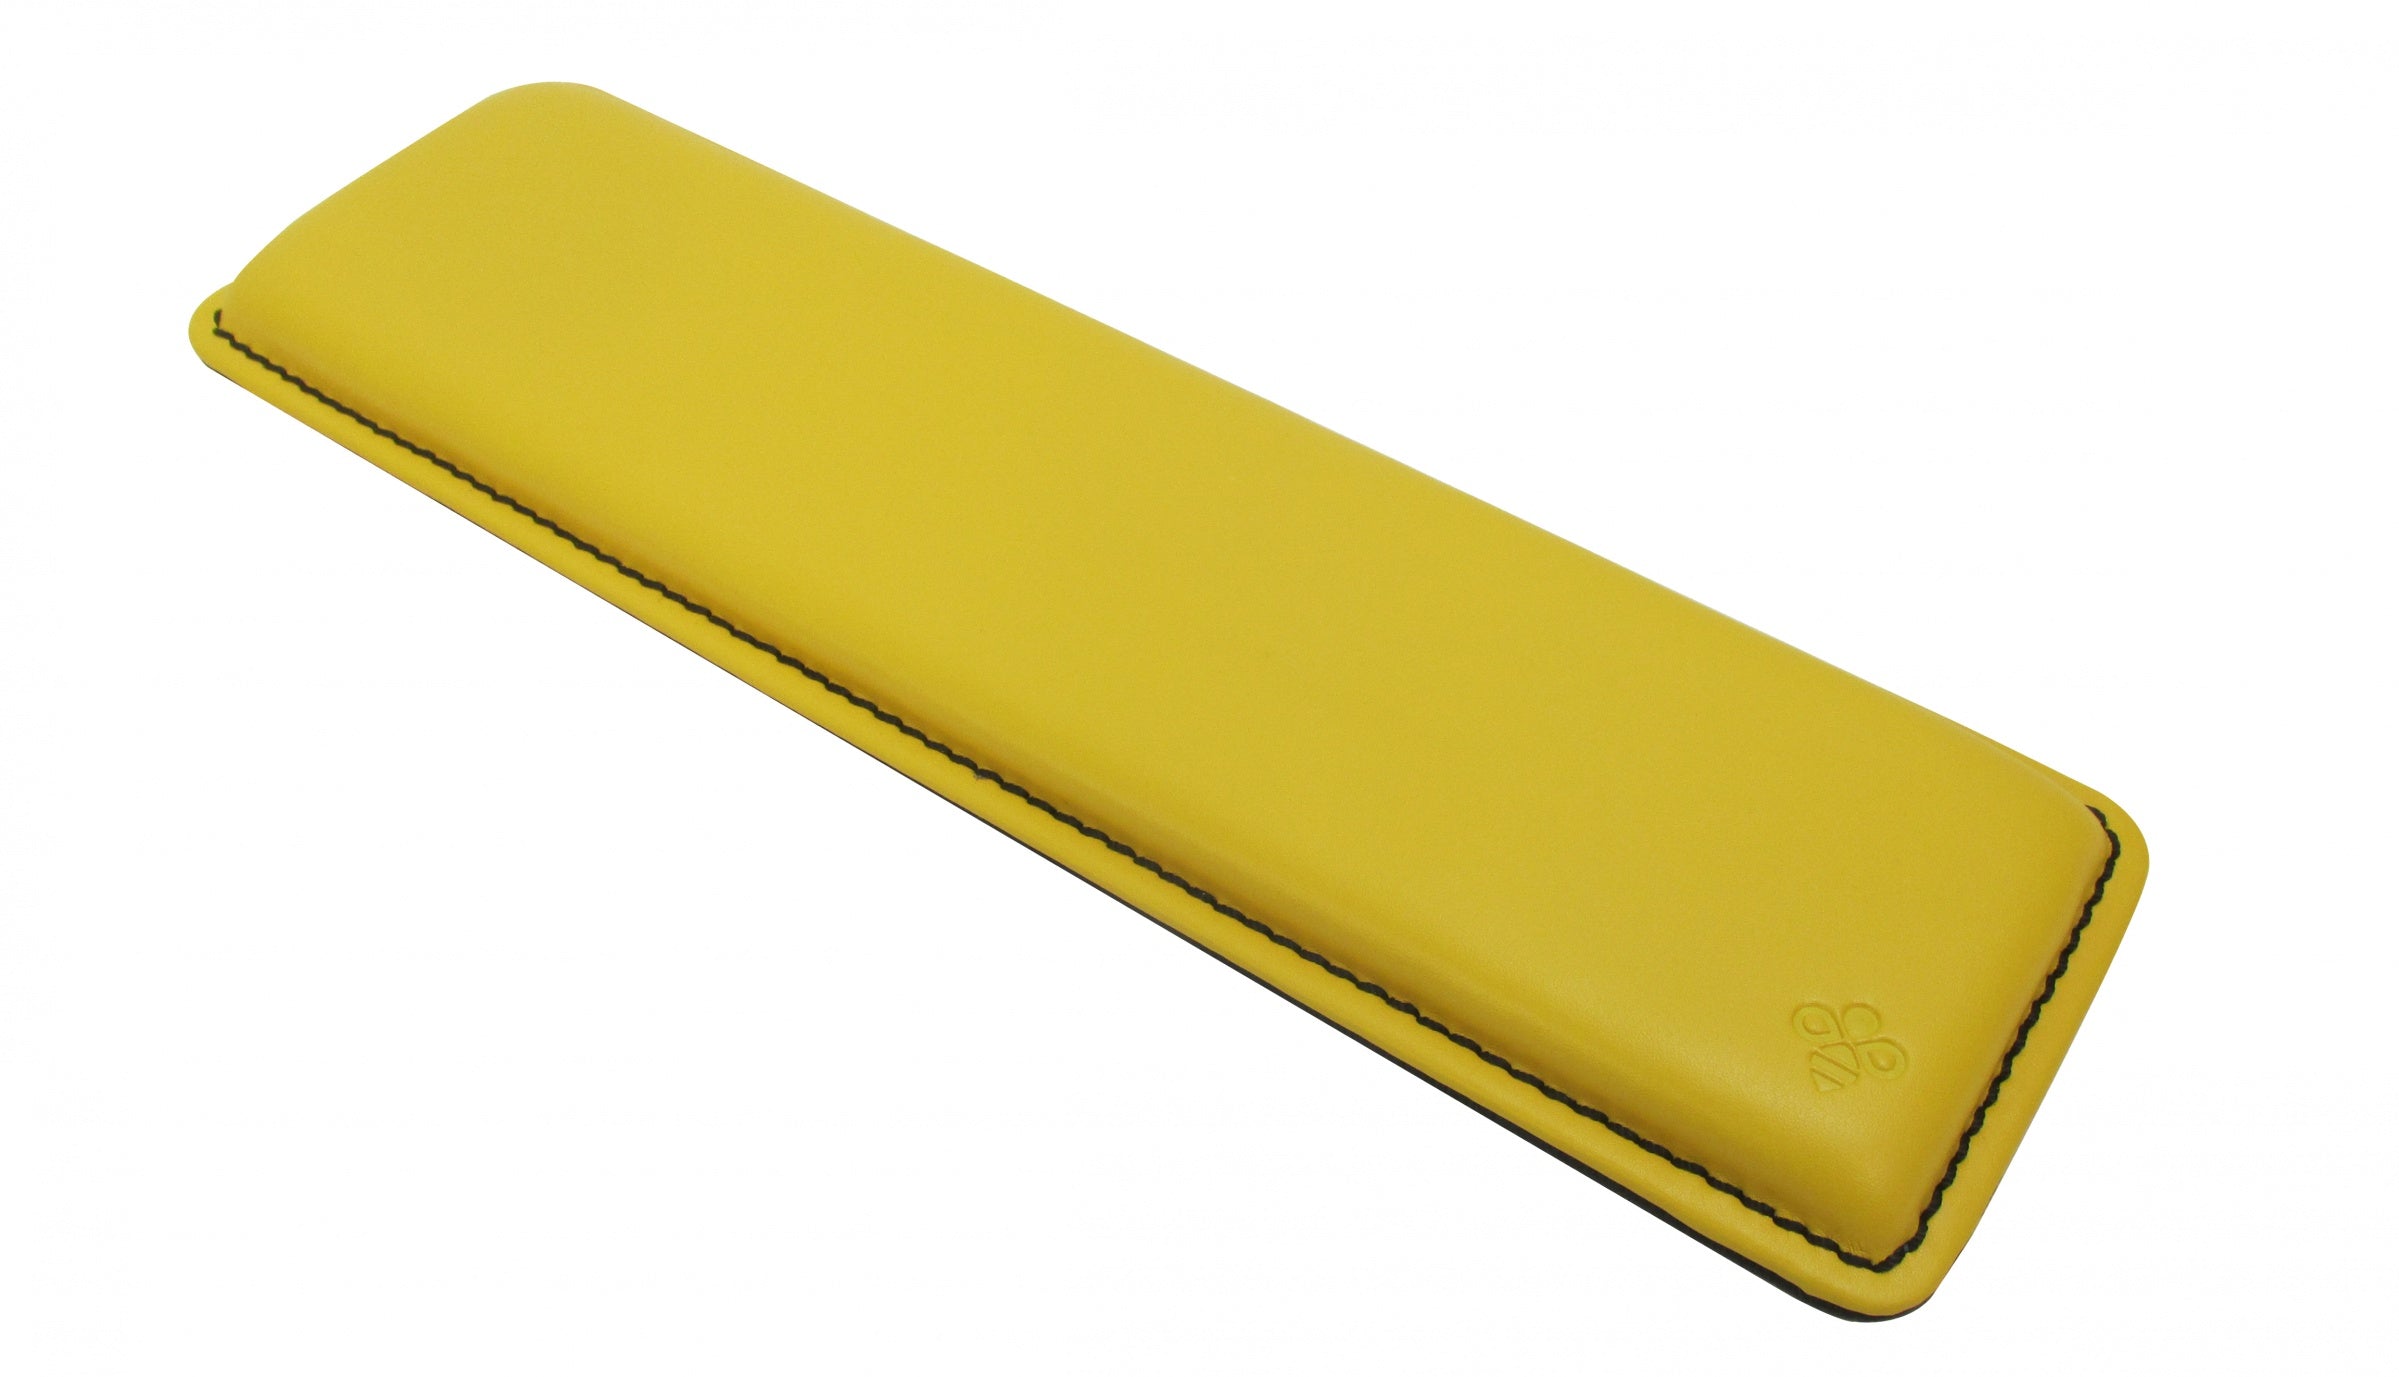 MK Honey Bee Compact 60% Wrist Rest Yellow Leather w/ Black Stitching MKWGTTRVH9 |0|